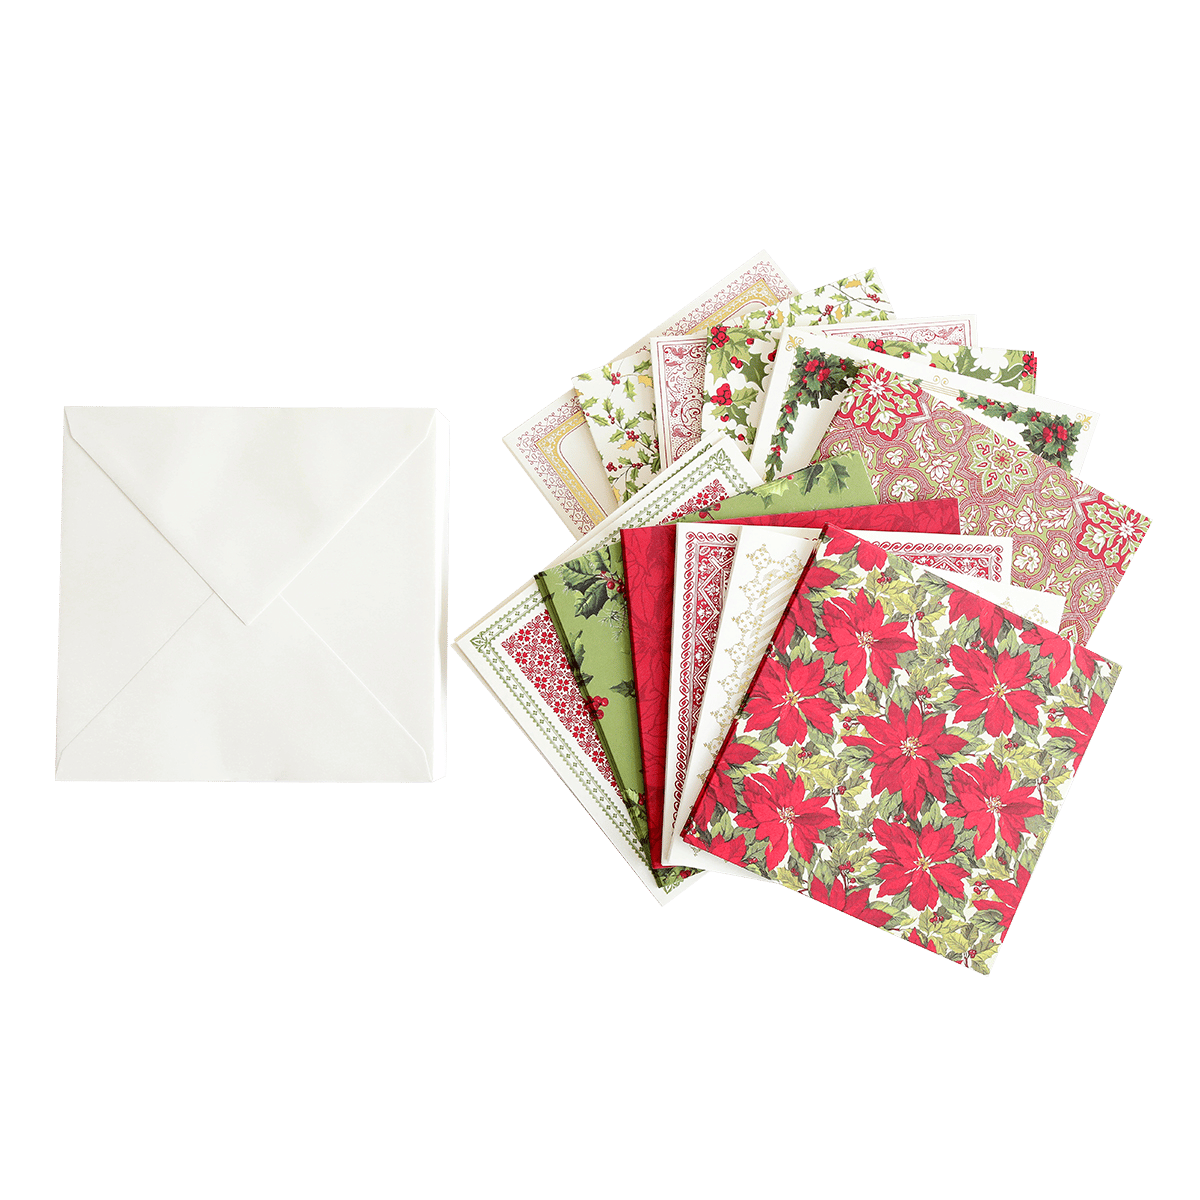 a bunch of cards and envelopes on a green background.